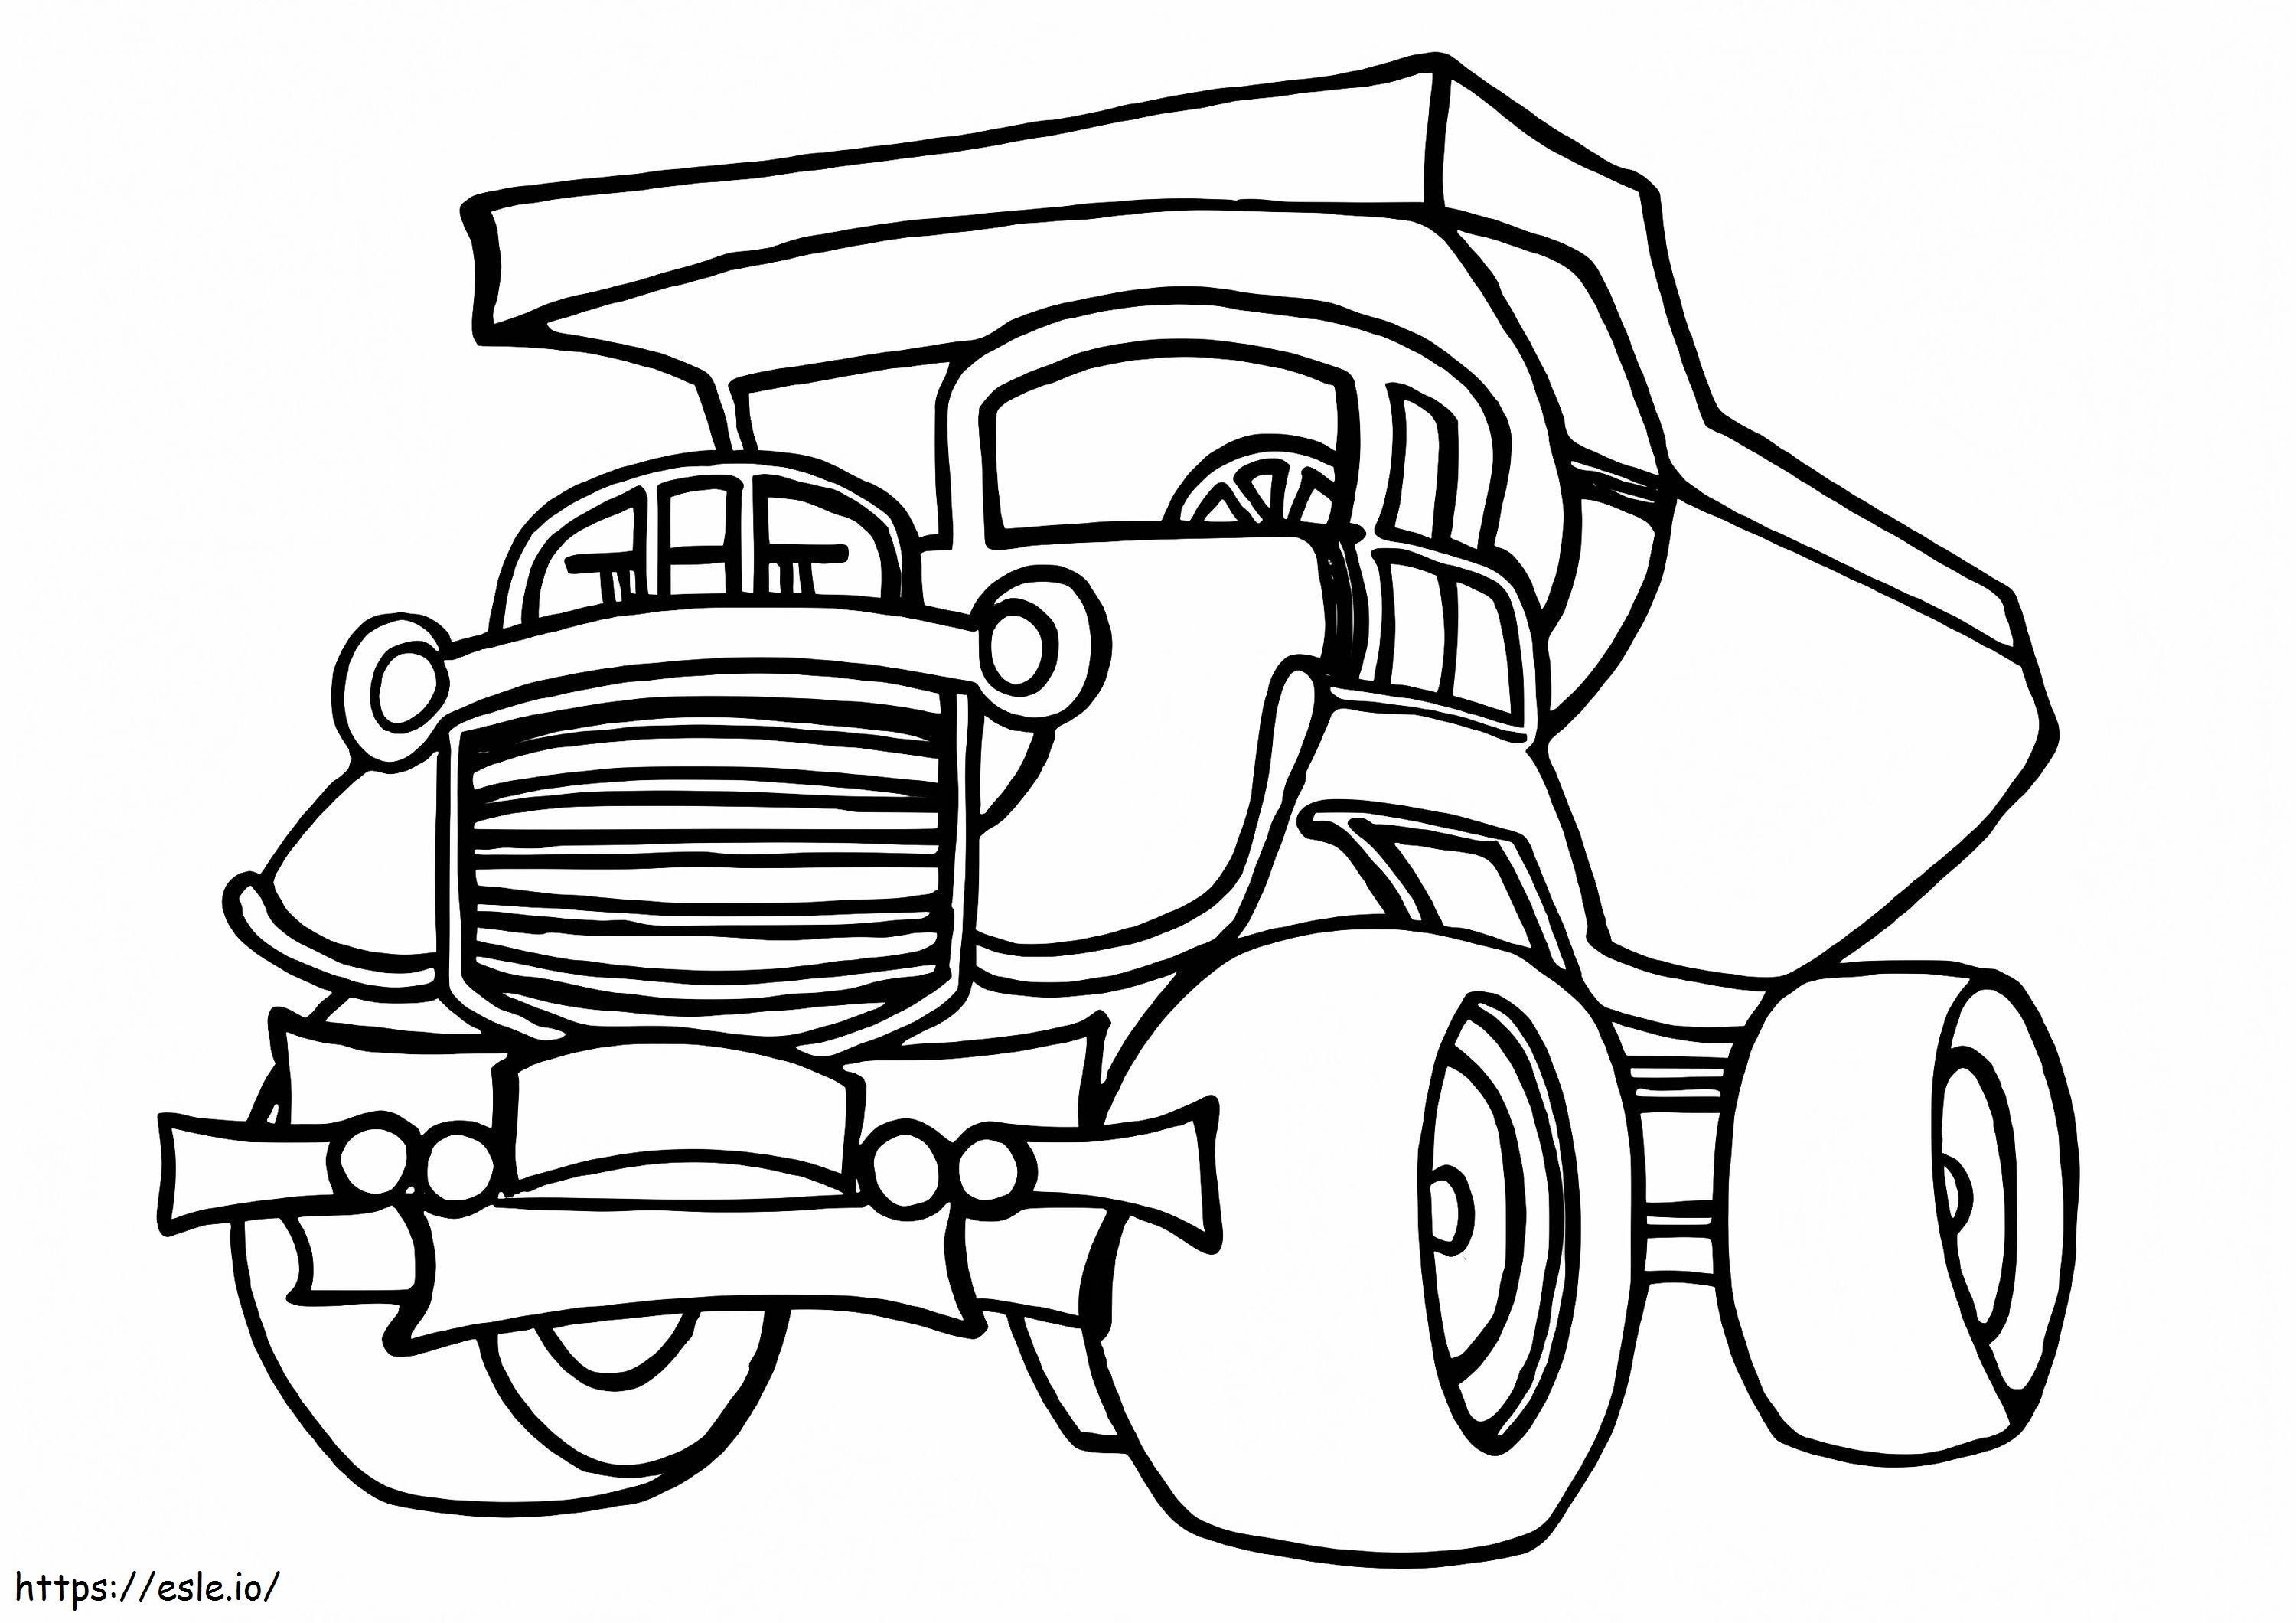 1526977549_The Dump Truck A4 E1637574226853 coloring page